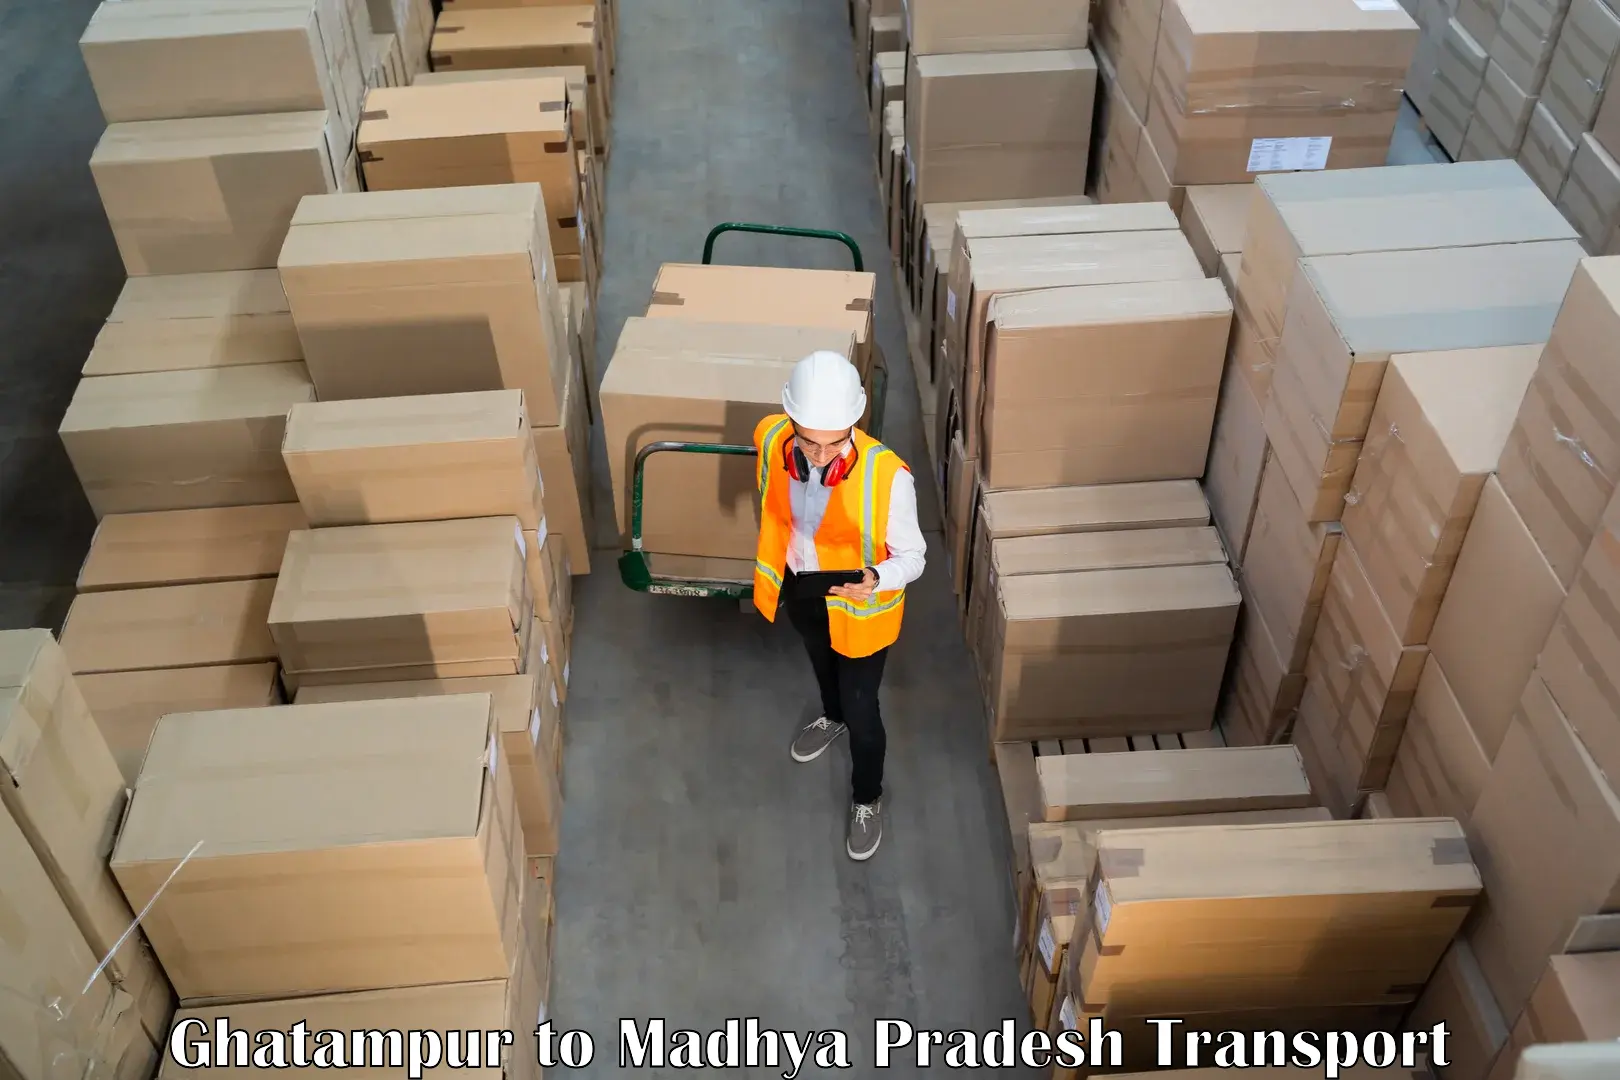 Daily parcel service transport Ghatampur to Datia